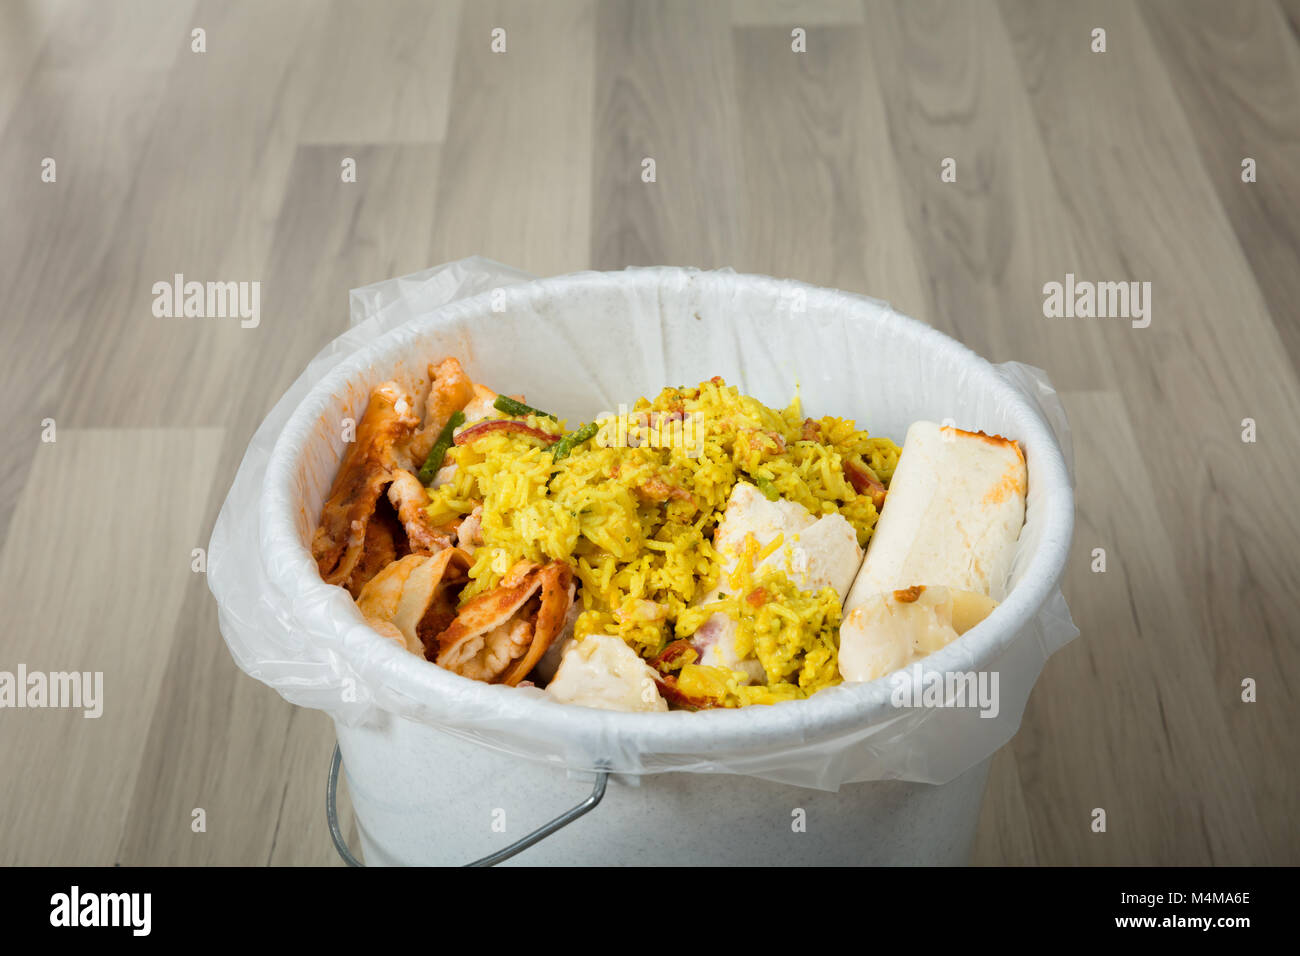 Close-up Of White Trash Bin Covered With Leftover Food Stock Photo